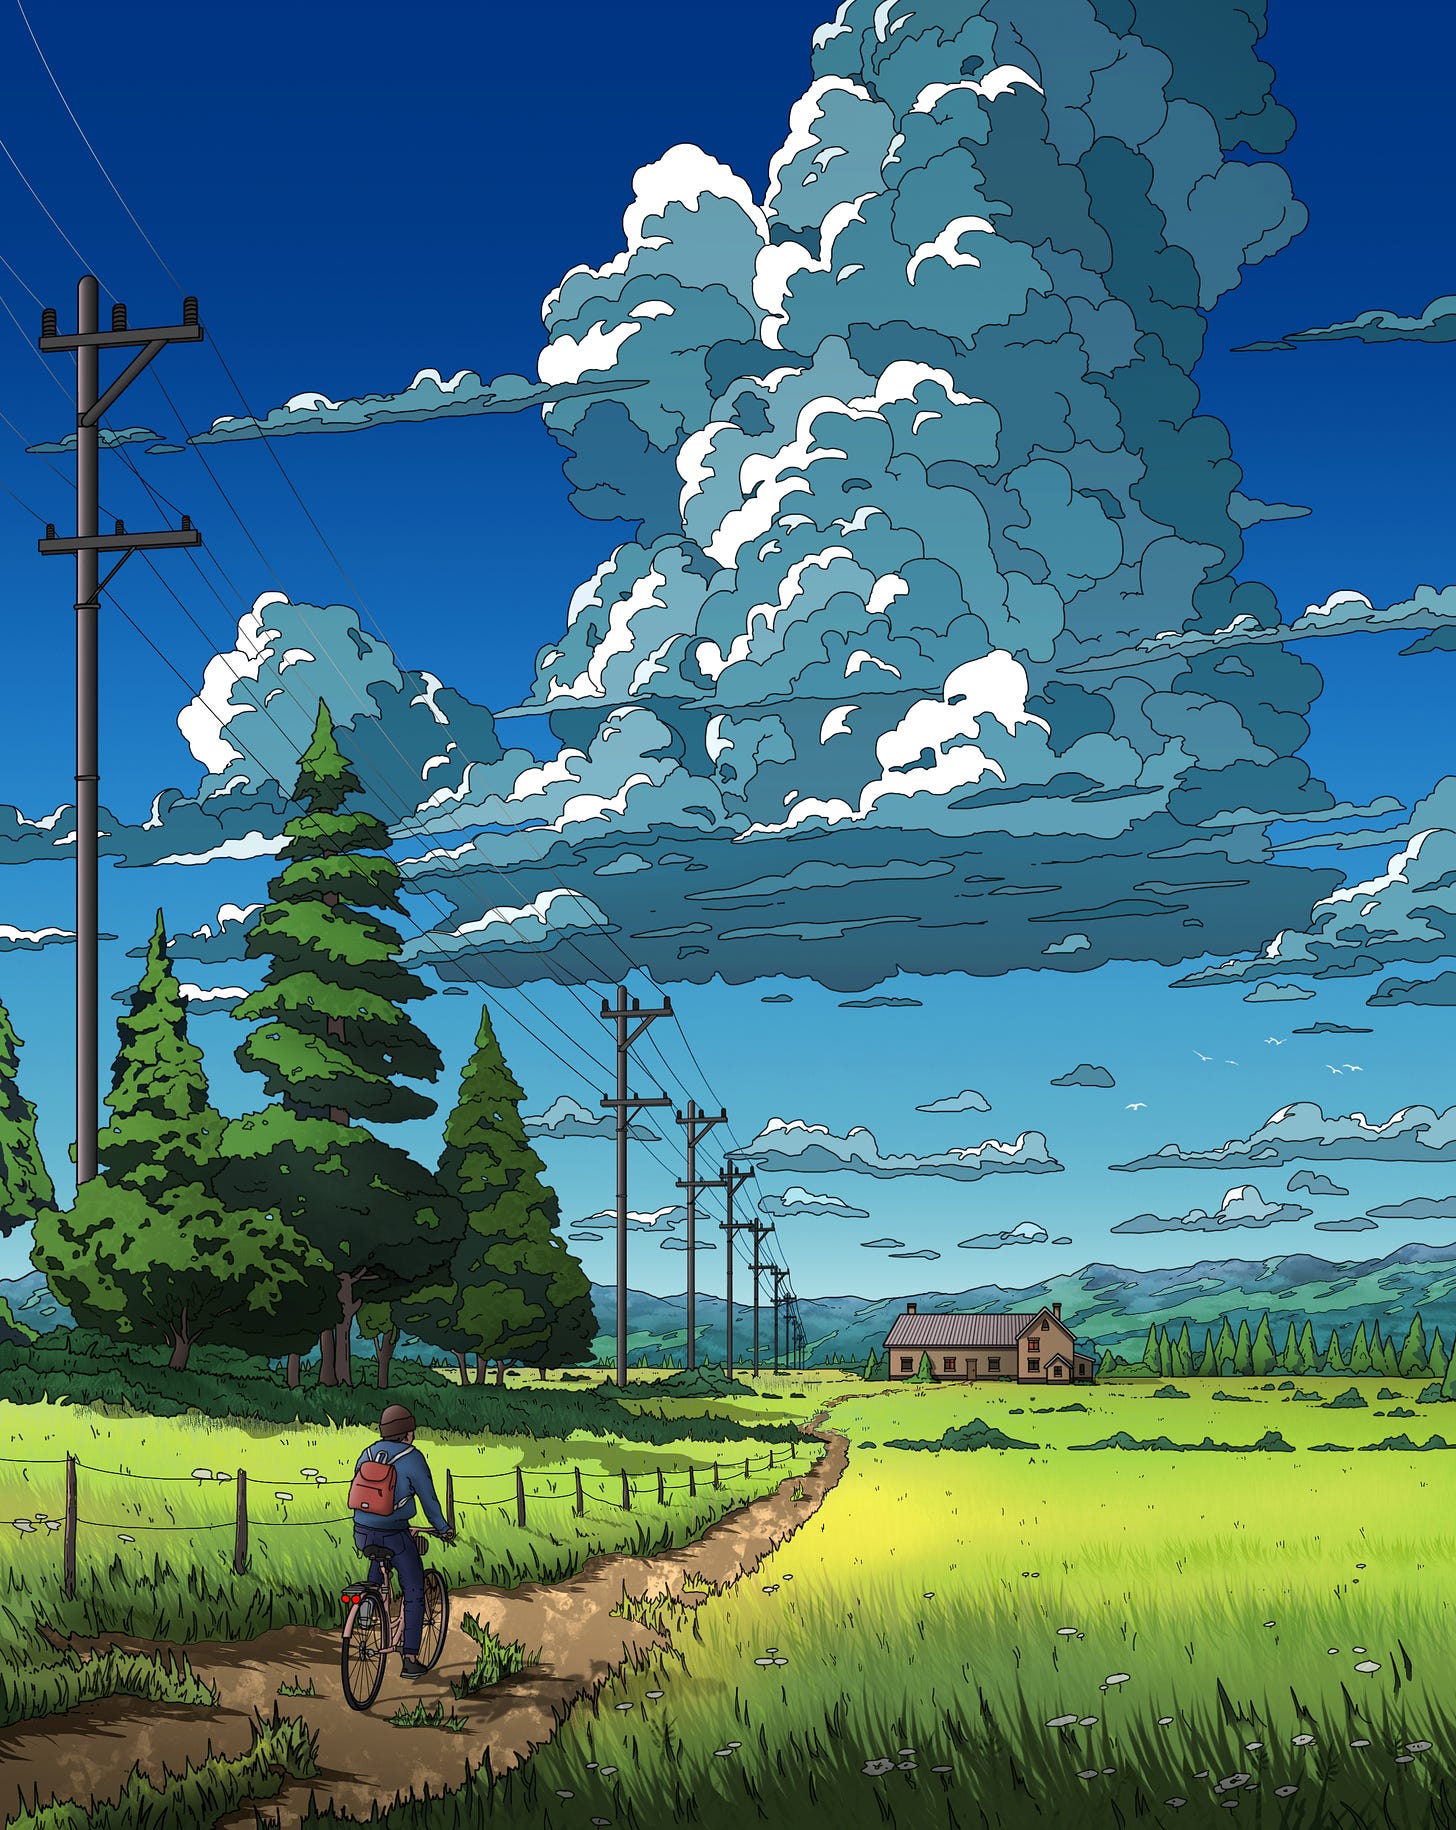 General 2100x2639 Christian Demczuk artwork digital art illustration field house trees clouds power lines nature bicycle mountains portrait display